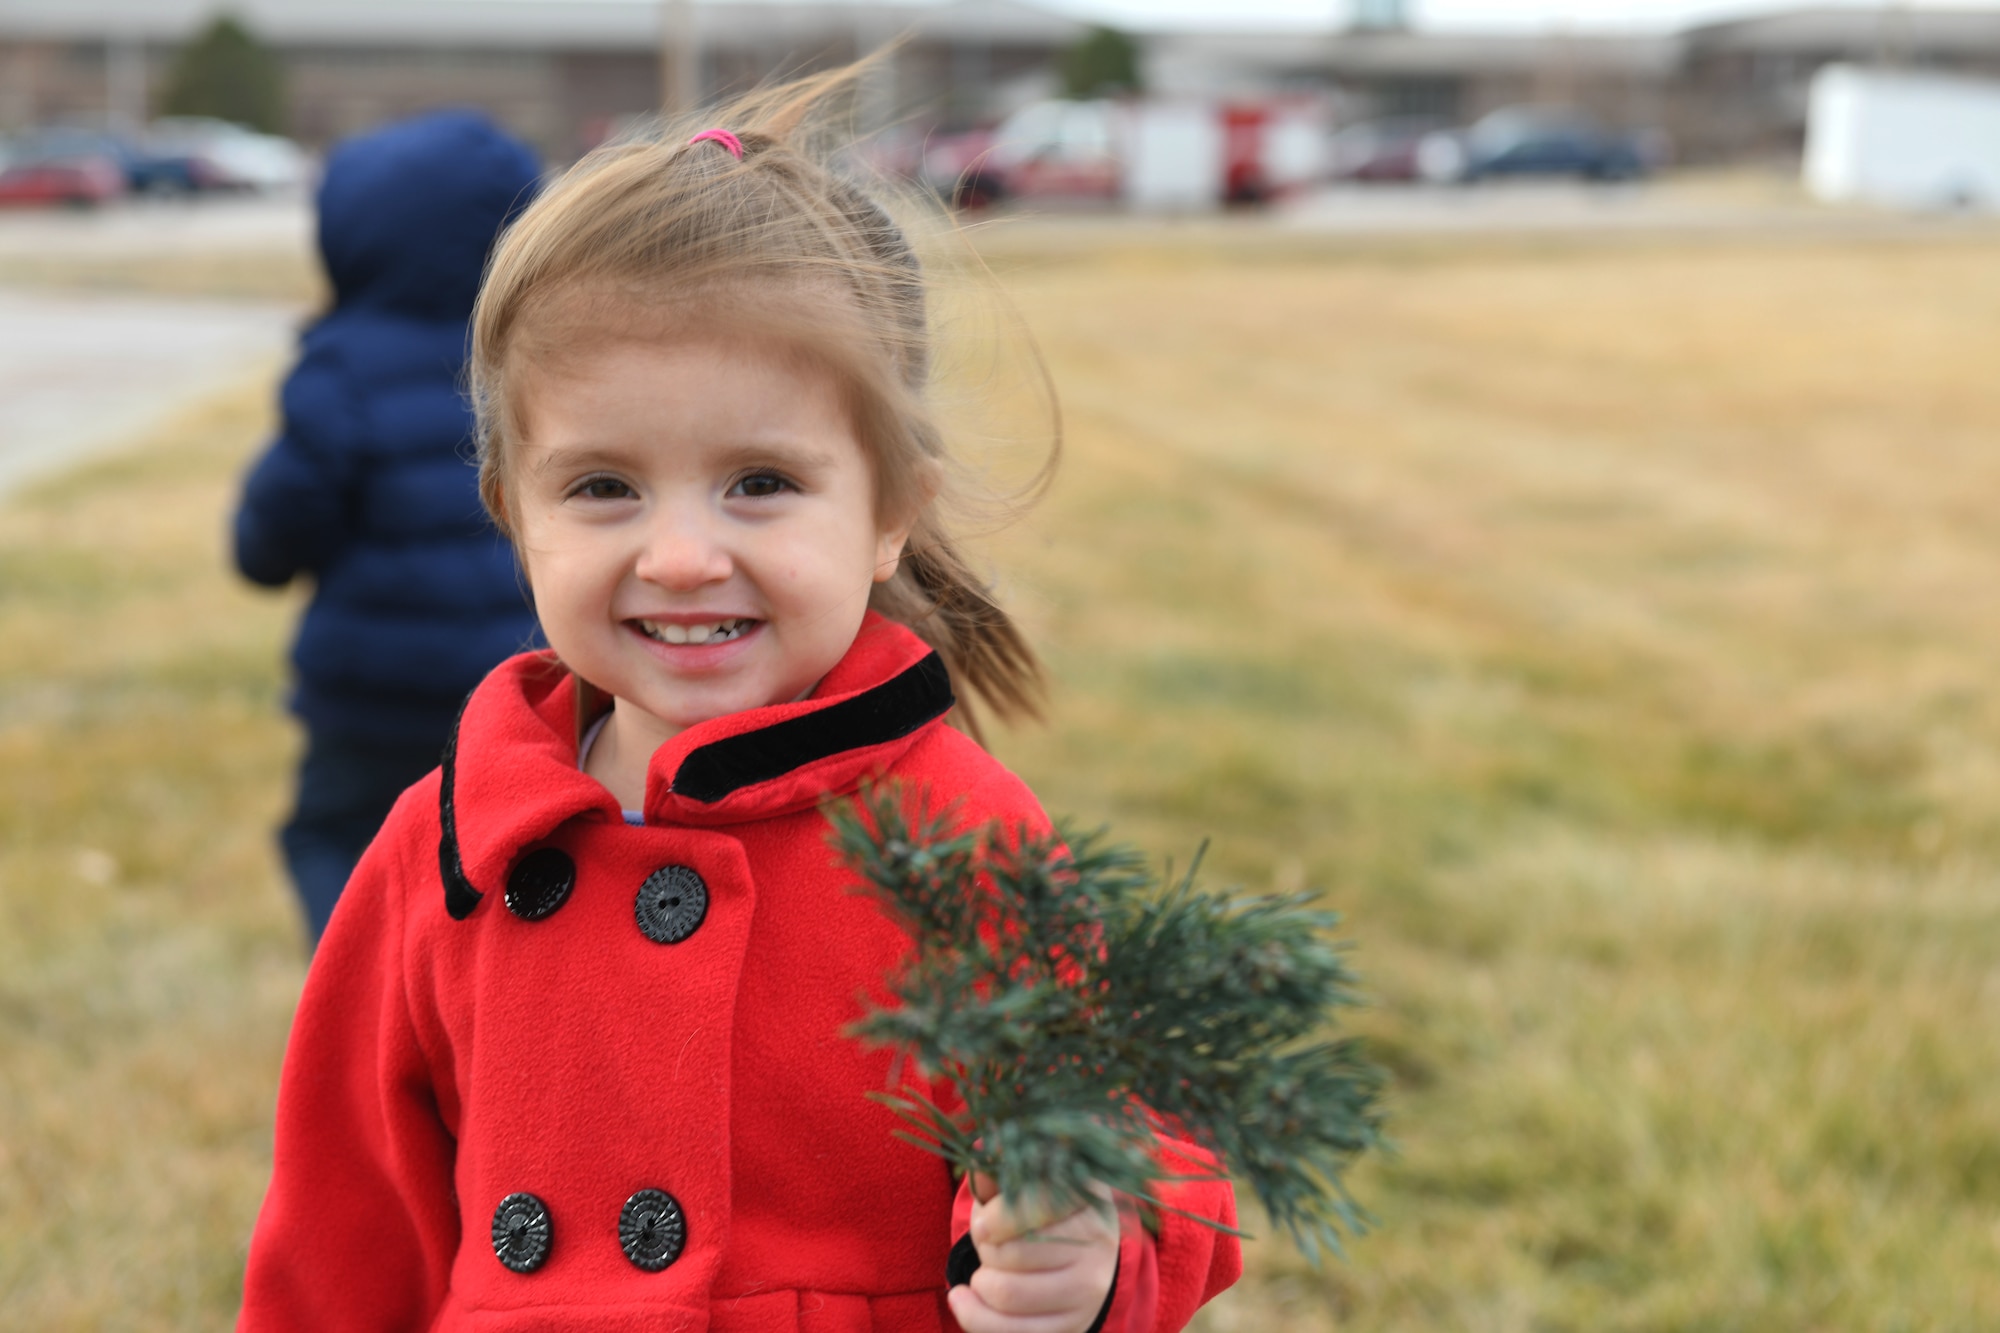 A child holds a branch while searching for tree at outdoor recreation on Ellsworth Air Force Base, S.D., Nov. 30, 2018. Trees for Troops is an event where community members all over the country donate trees to service members so they can have a free tree for the holidays. (U.S. Air Force photo by Airman 1st Class Thomas Karol)